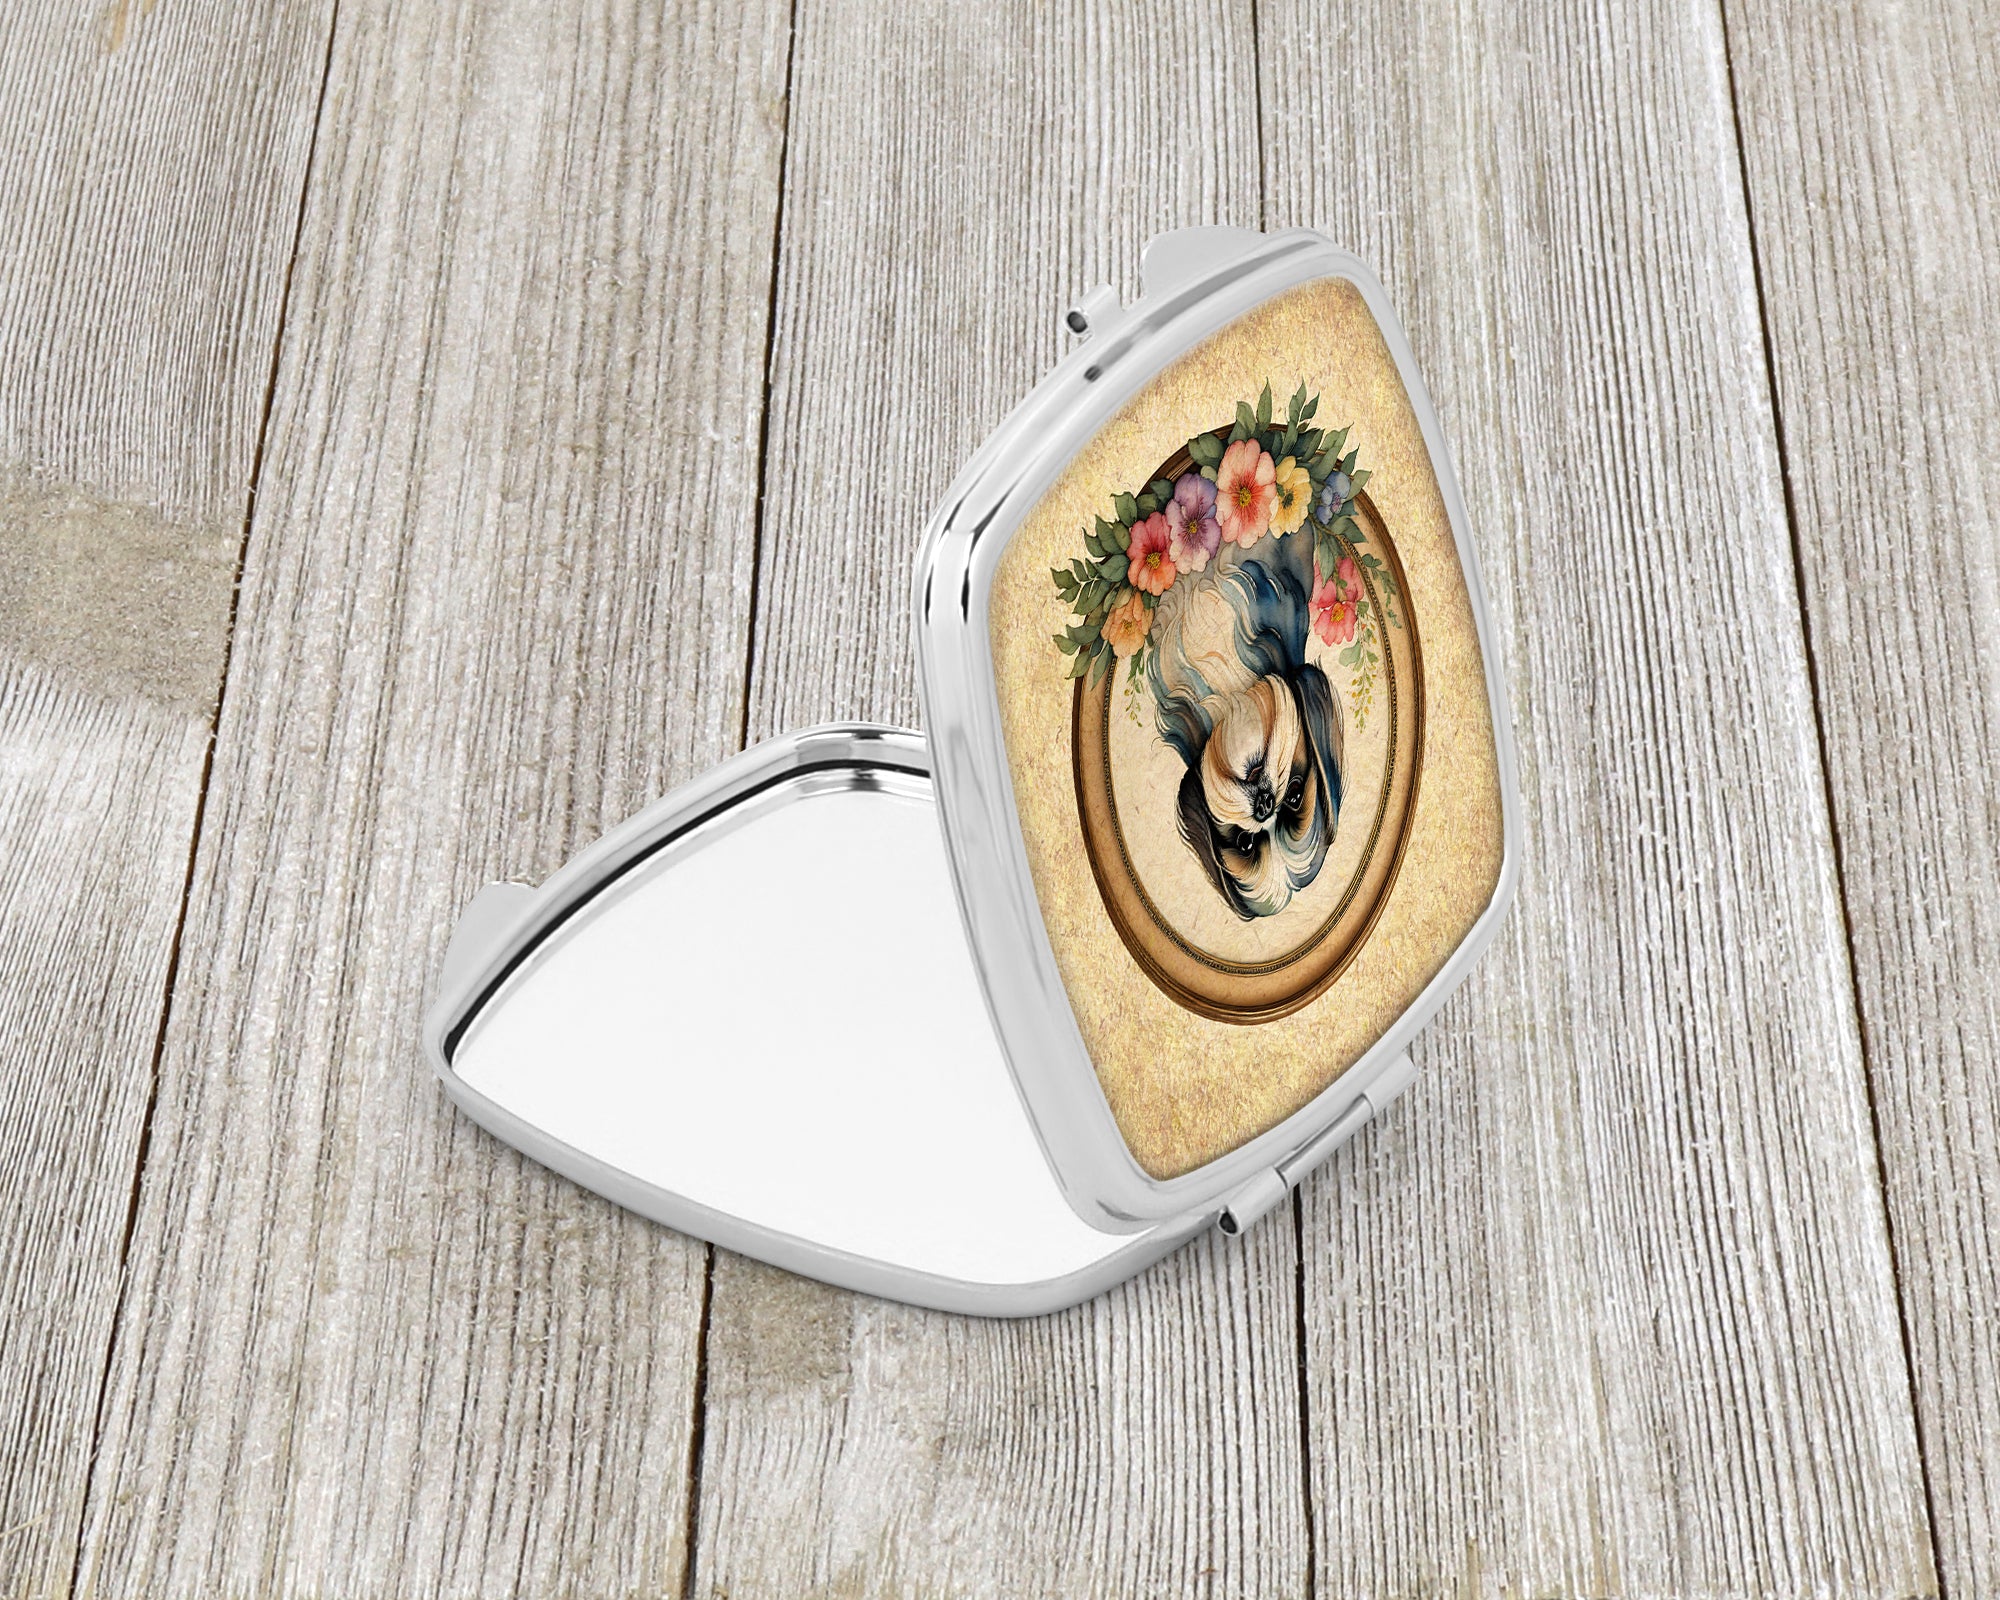 Shih Tzu and Flowers Compact Mirror